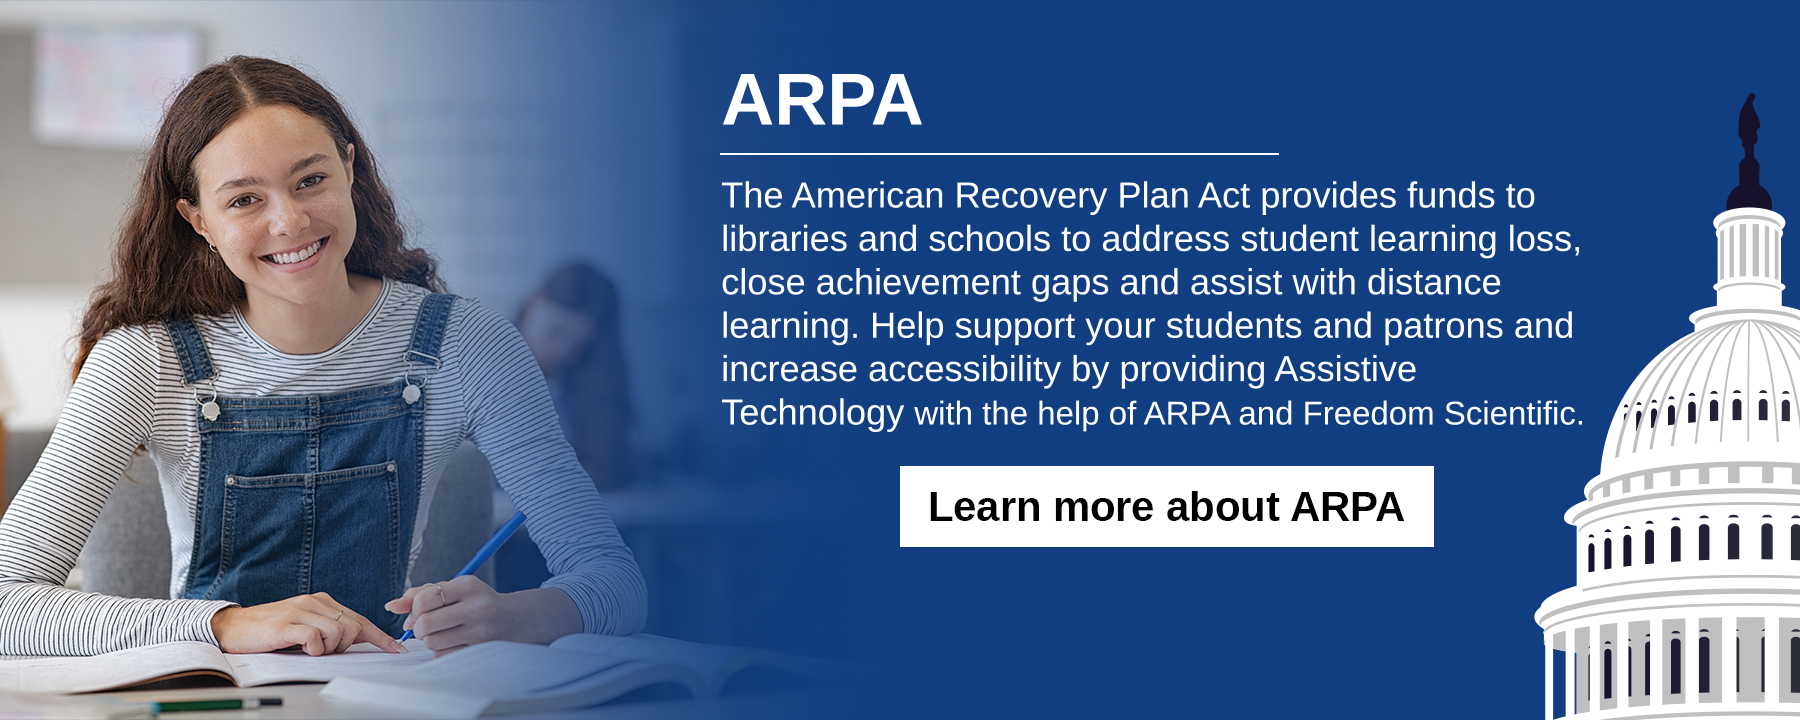 The American Recovery Plan Act provides funds to libraries and schools to address student learning loss, close achievement gaps and assist with distance learning. Help support your students and patrons and increase accessibility by providing Assistive Technology with the help of ARPA and Freedom Scientific.